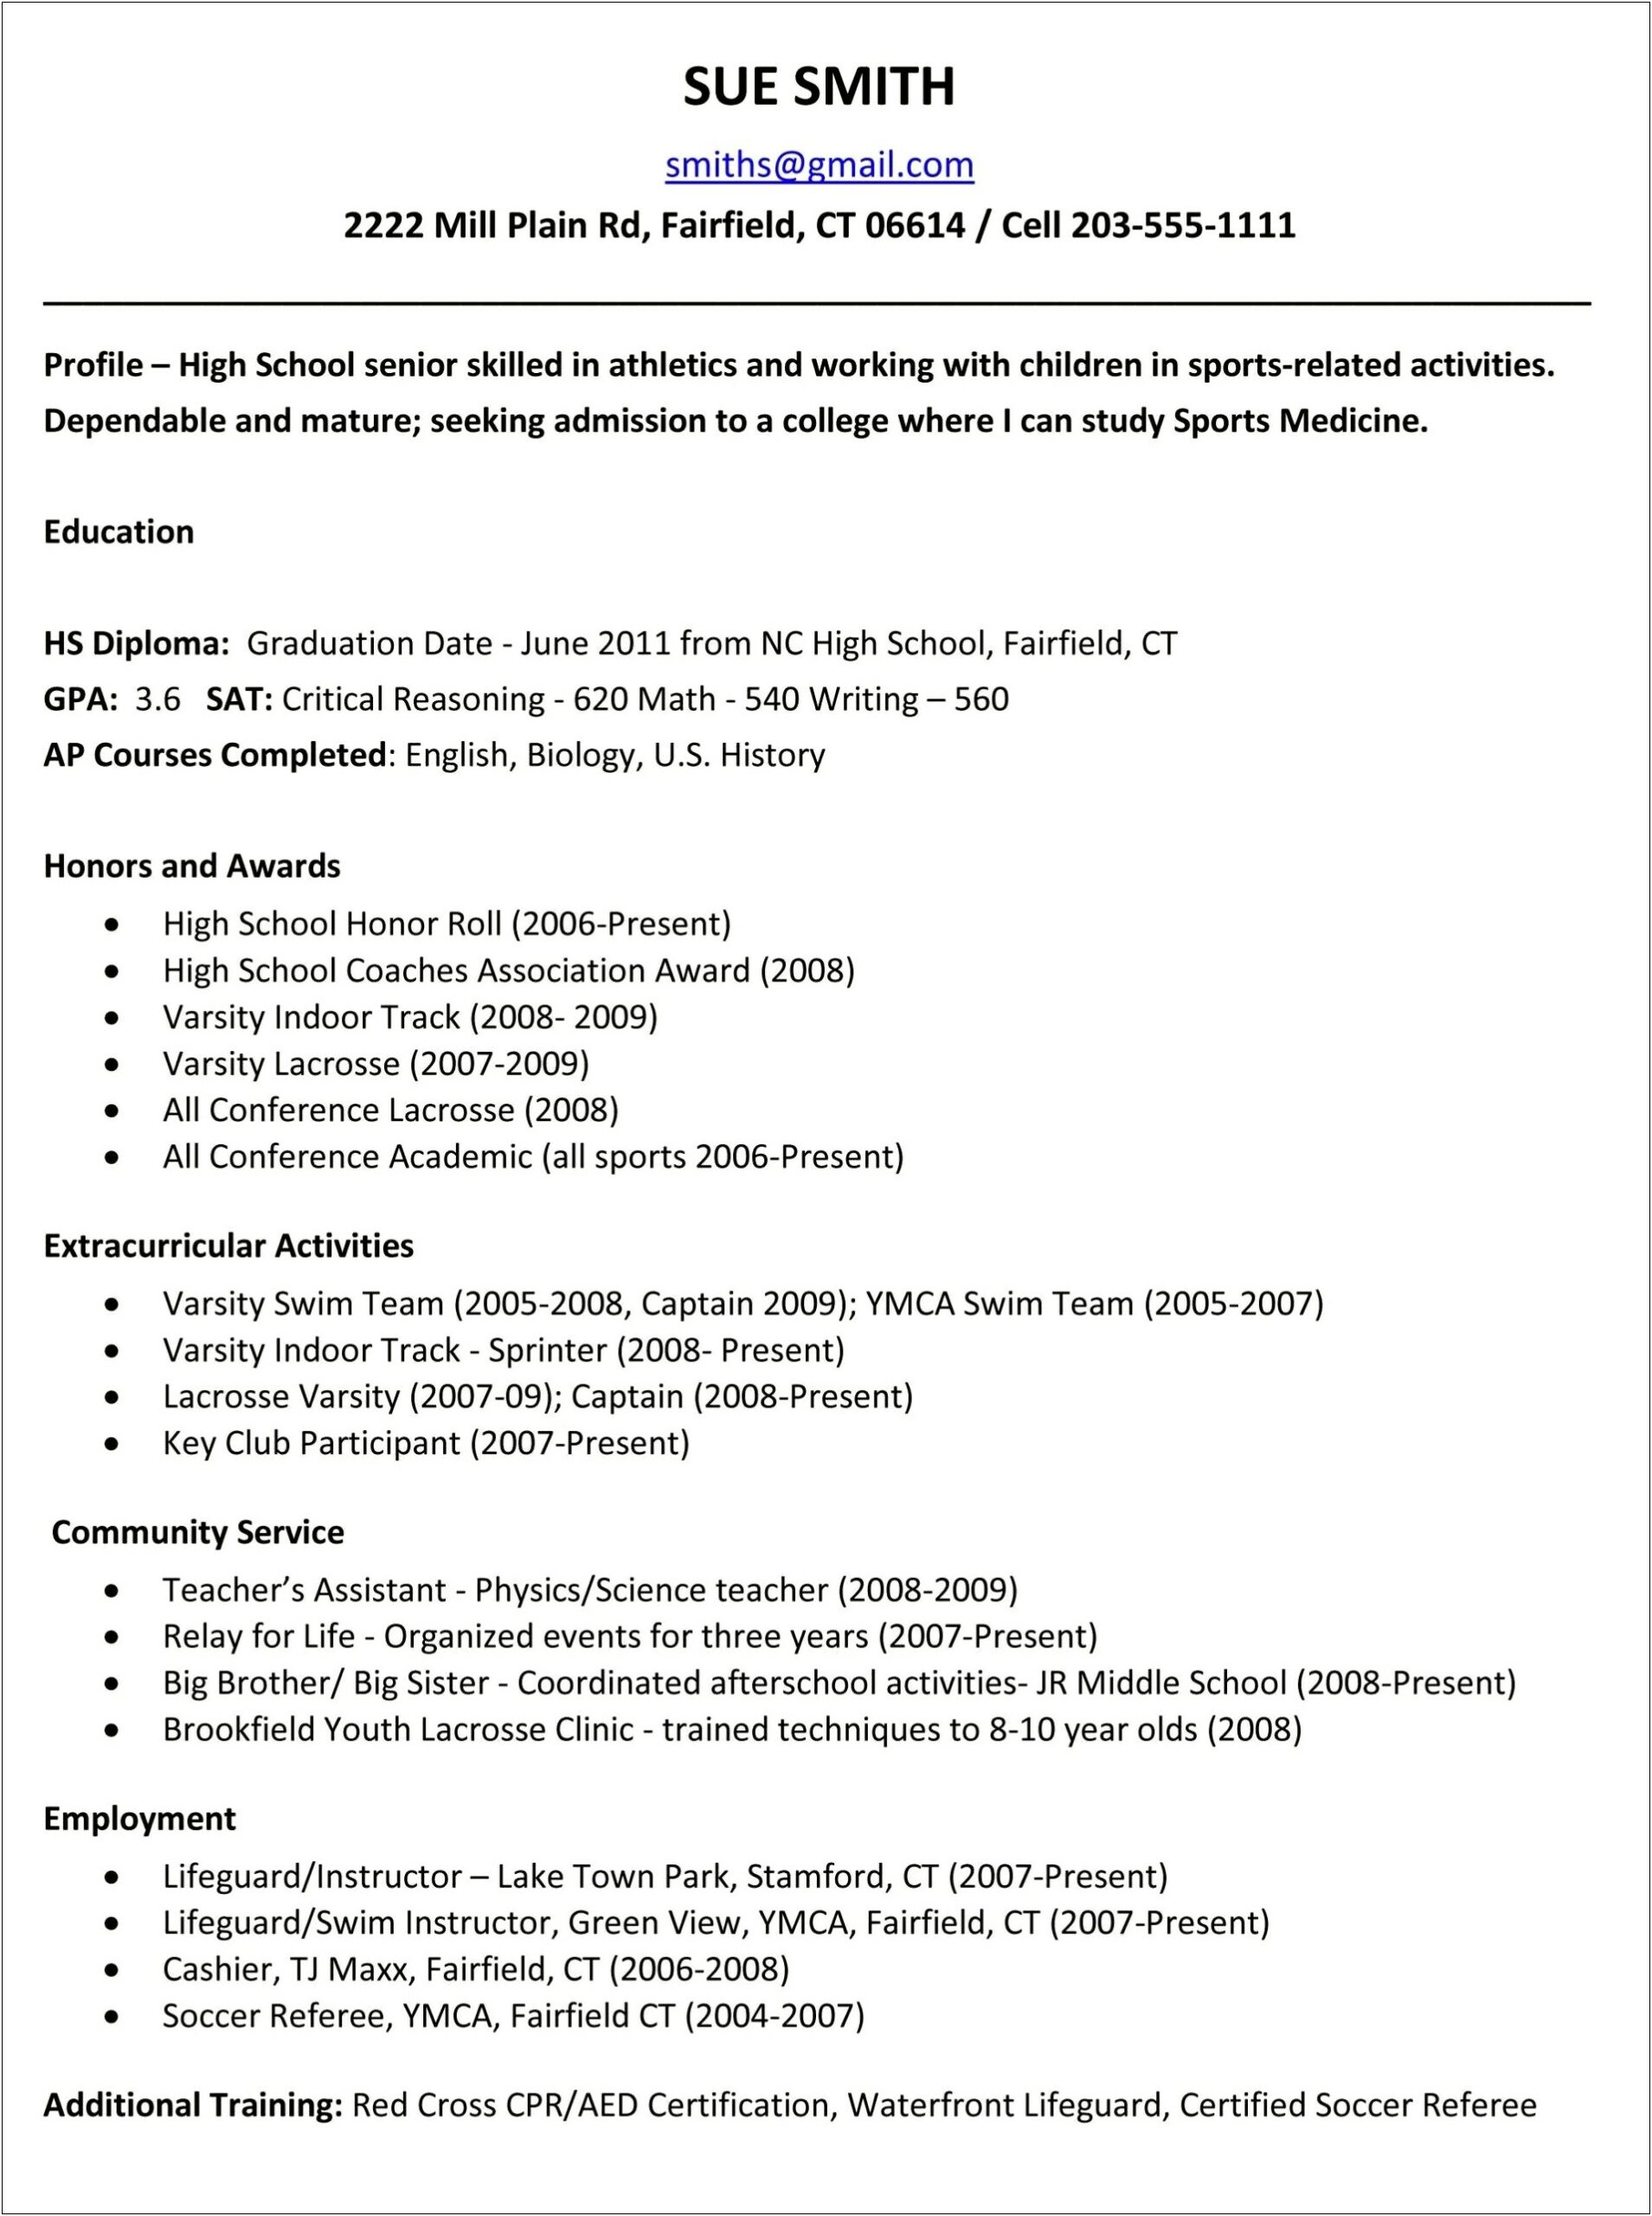 ﻿sample Resume With High School Honors